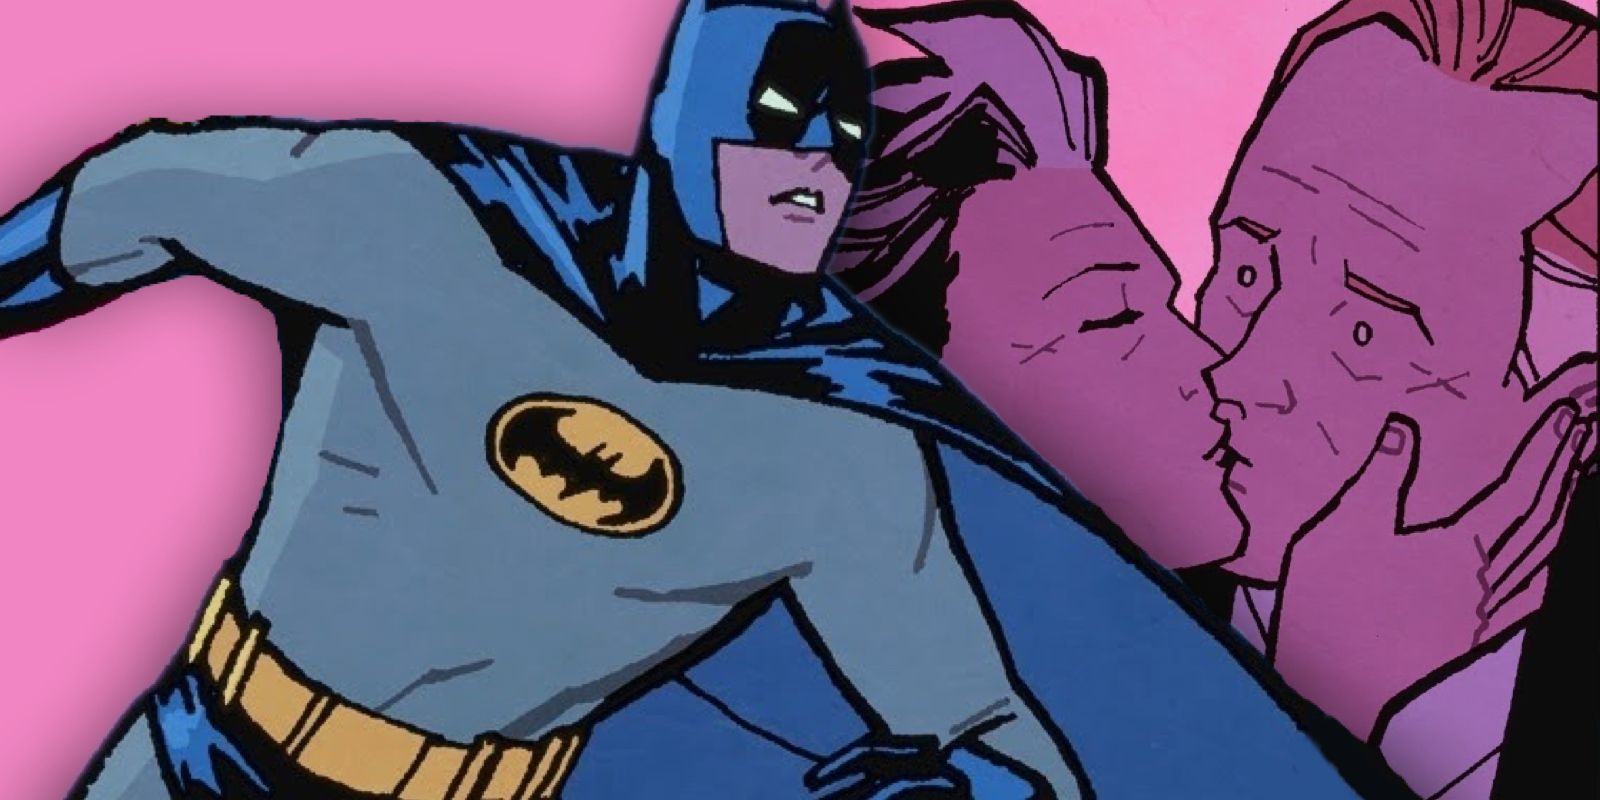 Catwoman has a romance with someone else that is not Batman.